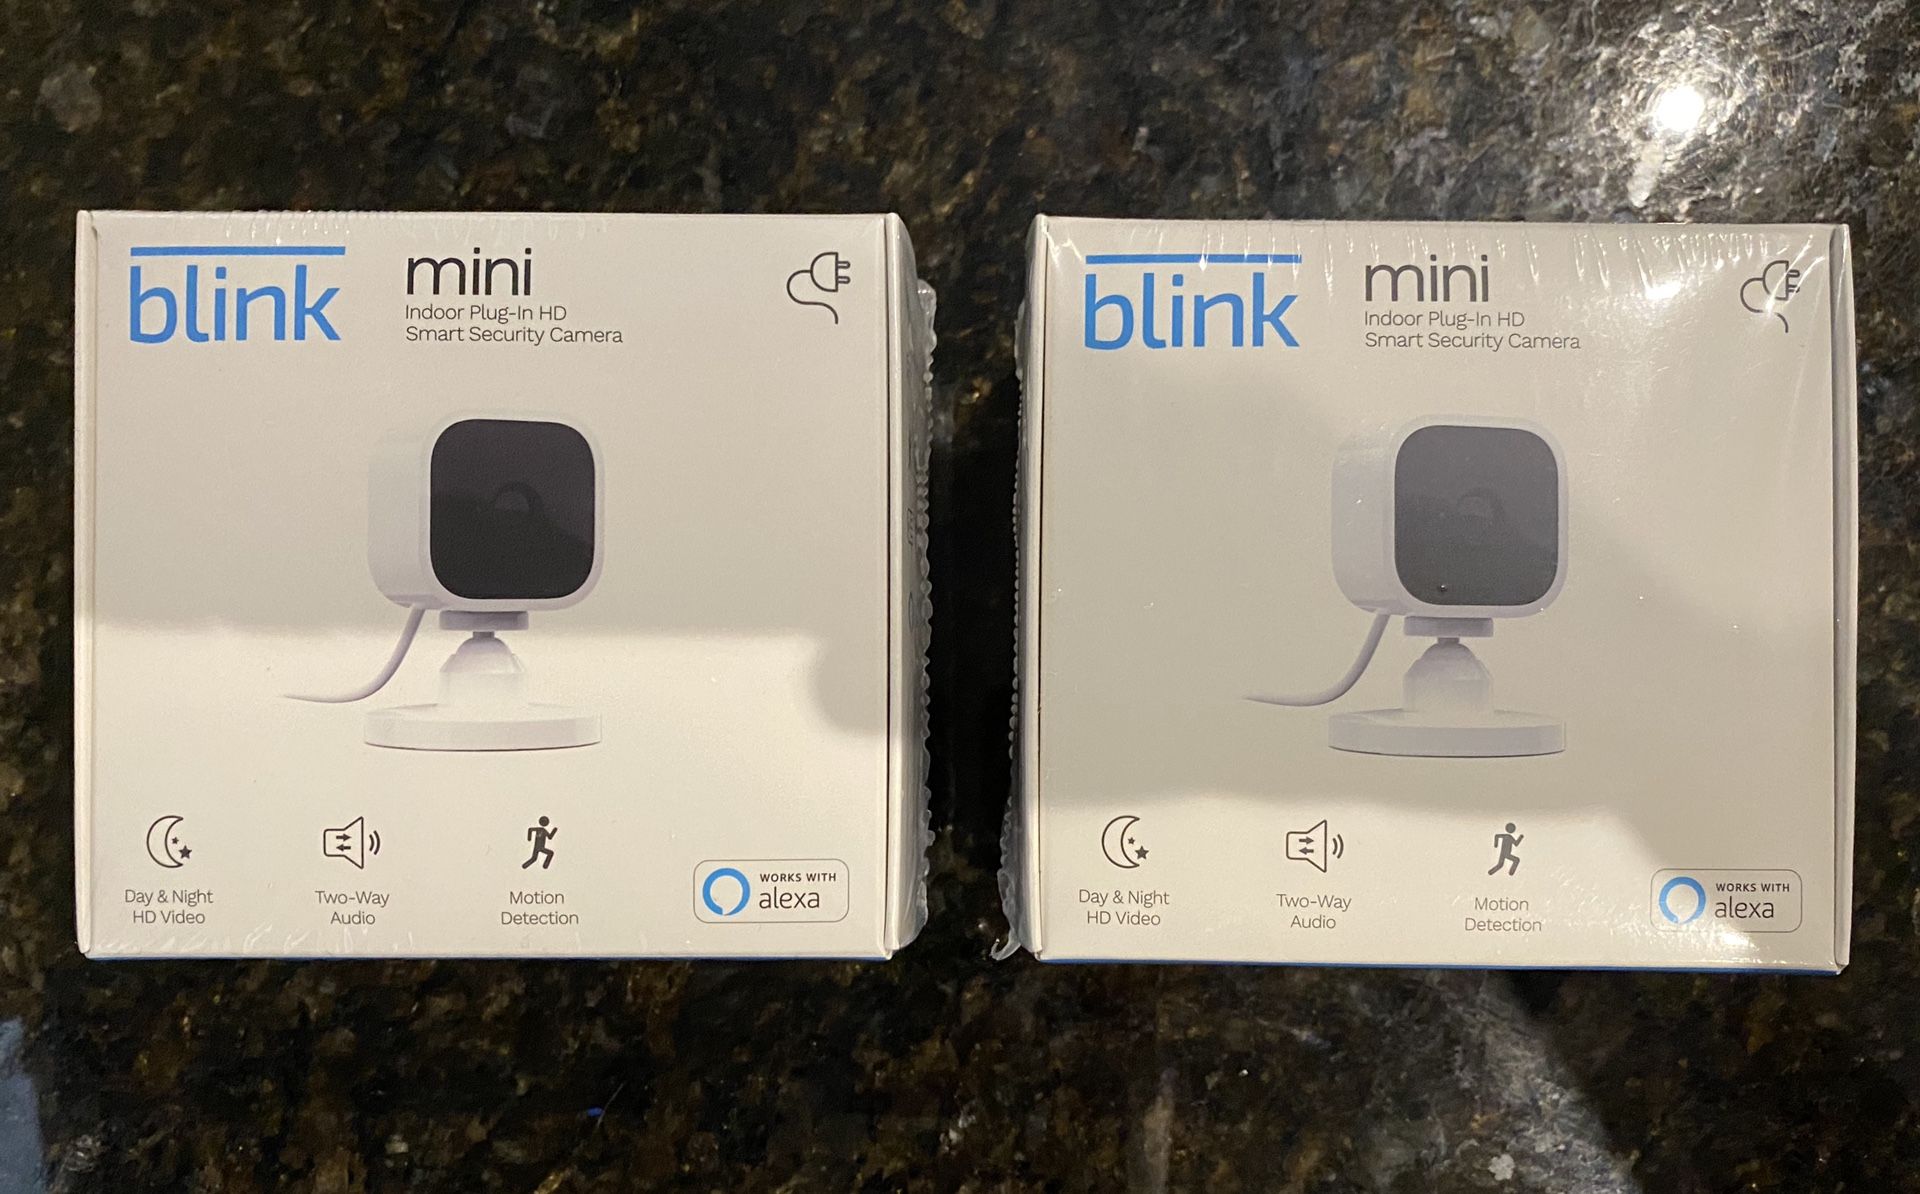 2 Brand New Blink Mini security cameras sealed in plastic